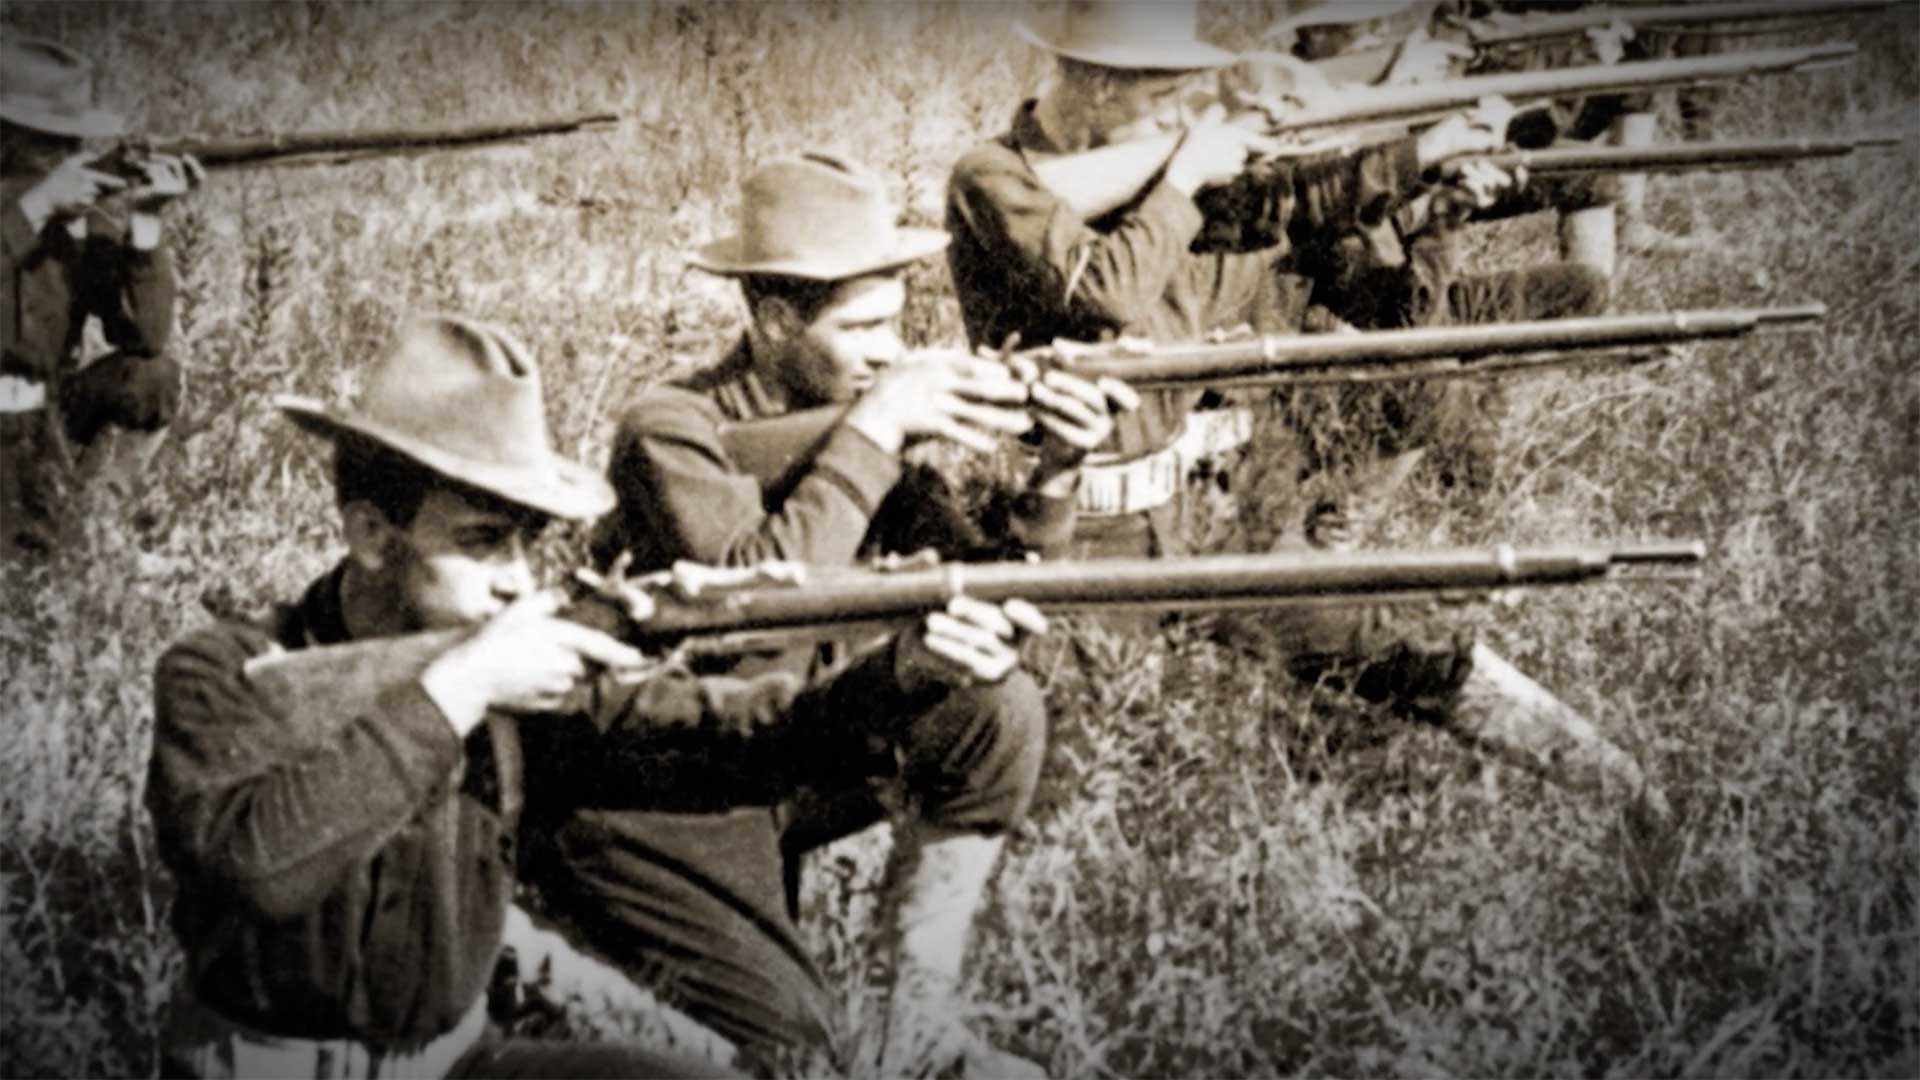 U.S. troops armed with the Springfield Model 1873 "Trap-Door" breech-loading rifle.